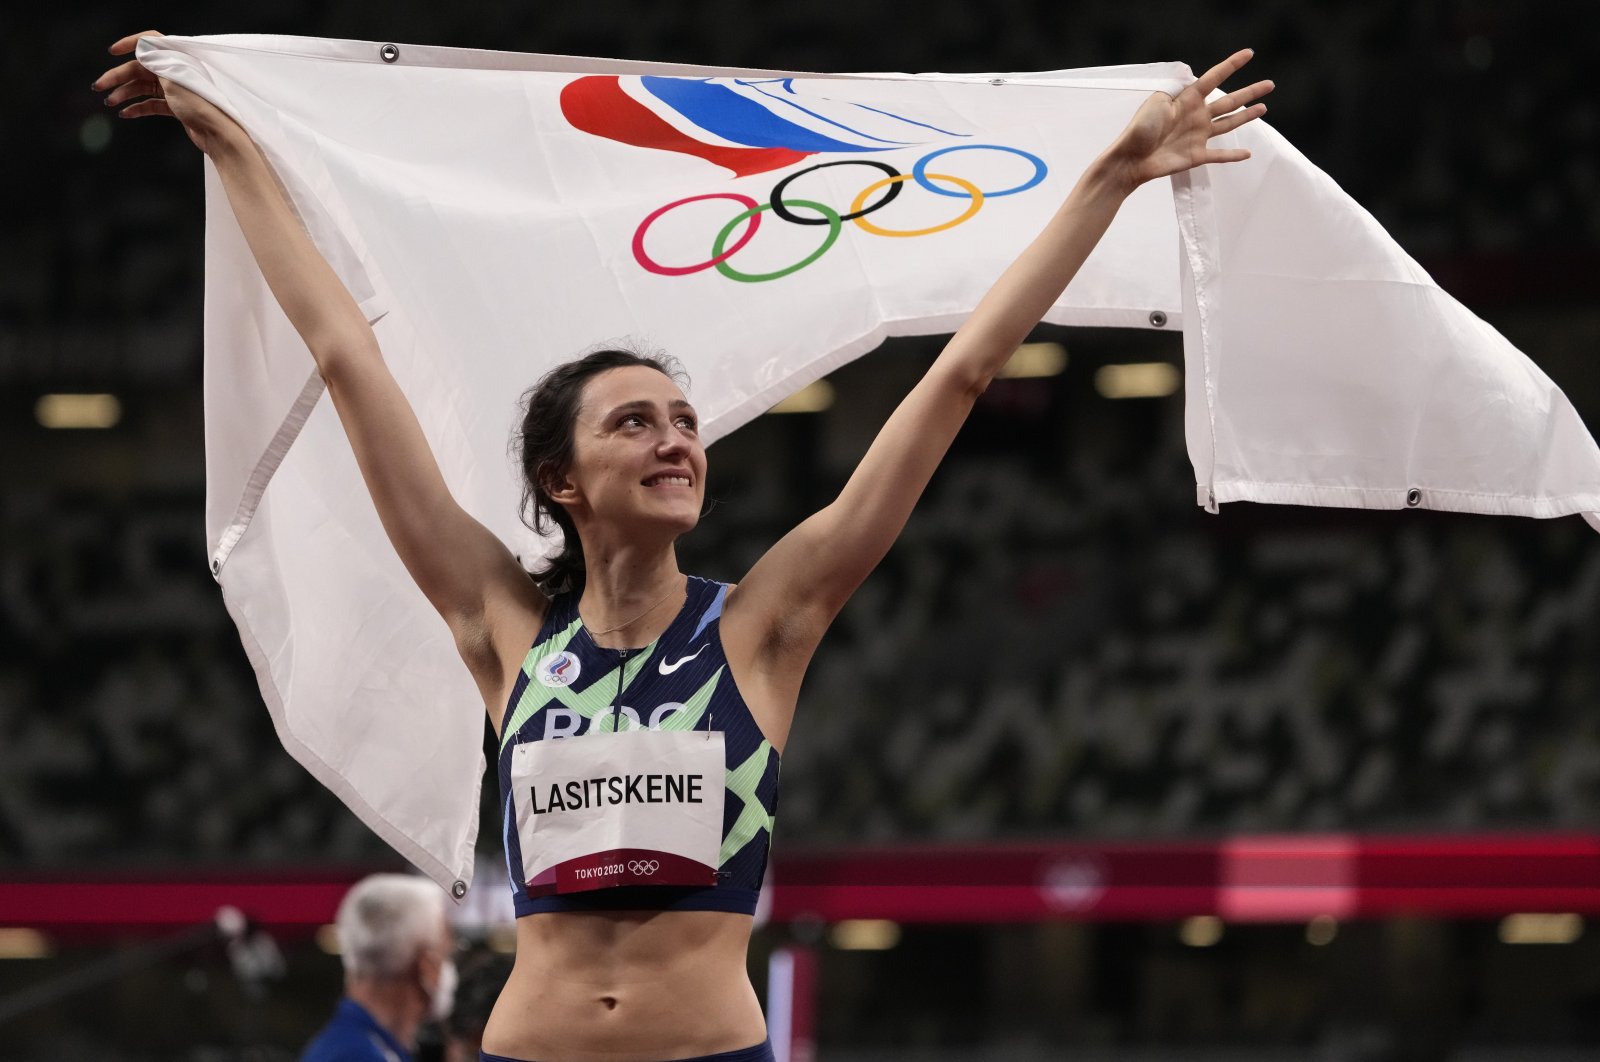 Mariya Lasitskene of the Russian Olympic Committee, reacts after winning the women&#039;s high jump final at the Tokyo 2020 Olympics, Aug. 7, 2021. (AP Photo)